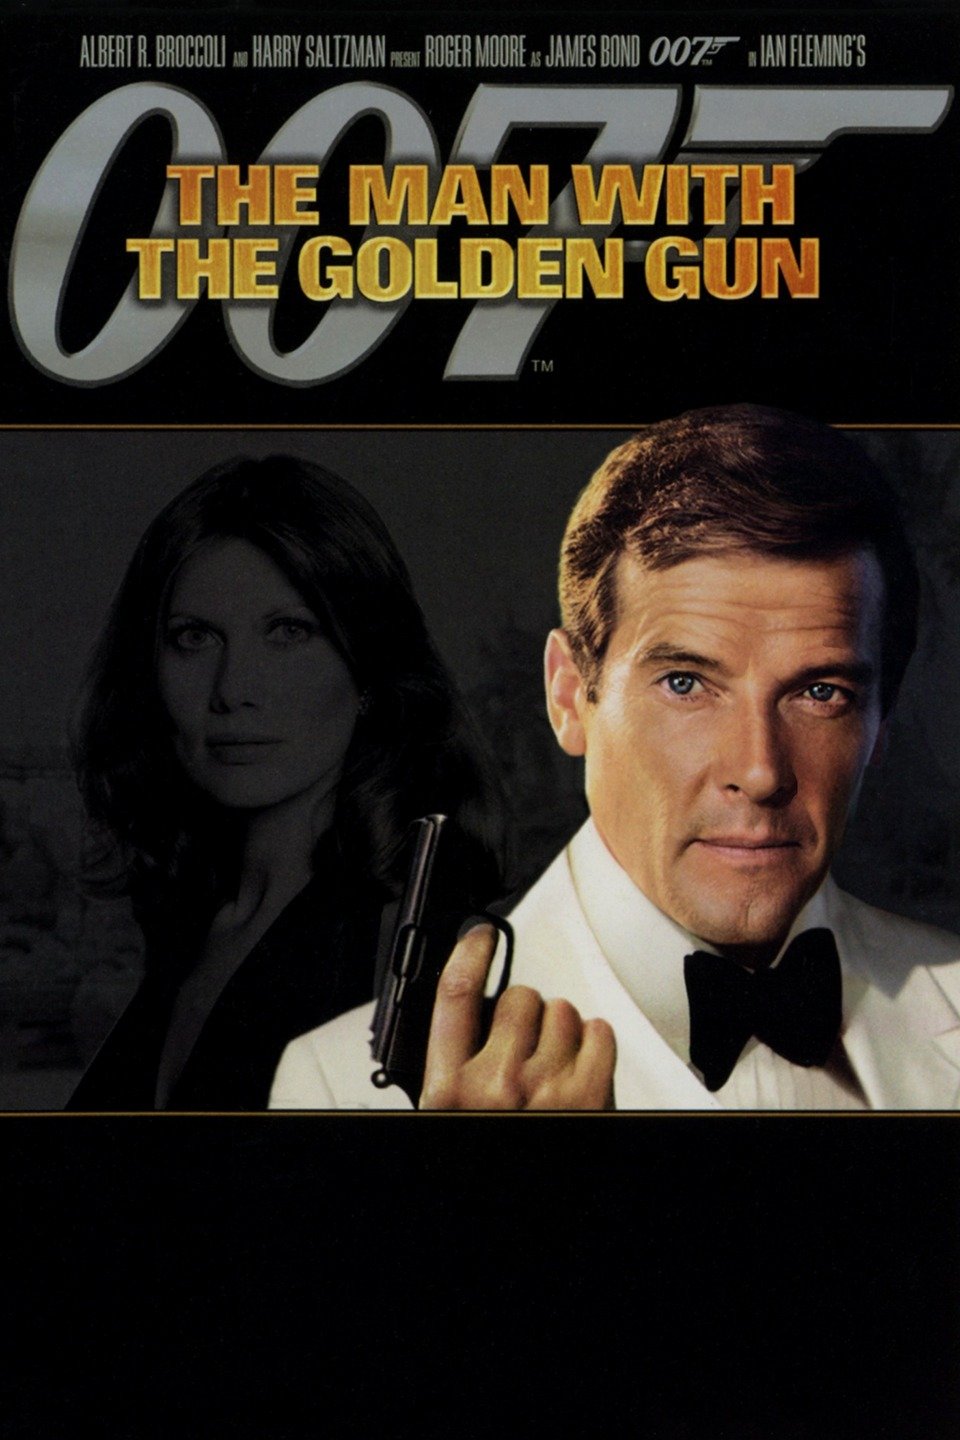 The Man with the Golden Gun (1974) | Soundeffects Wiki | Fandom